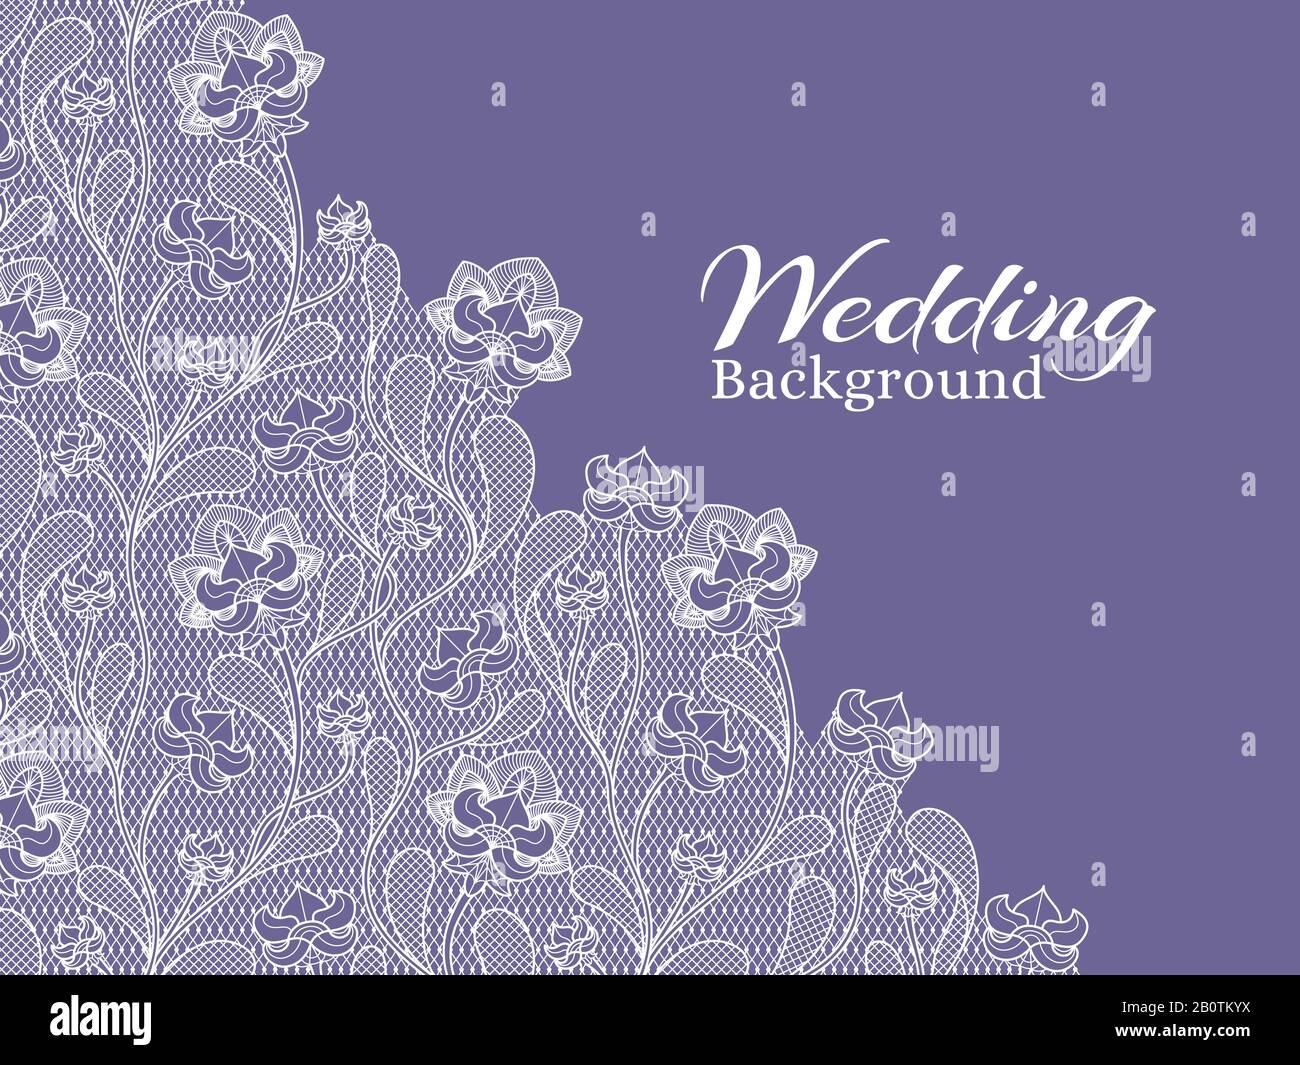 Wedding floral vector background with lace pattern. Wedding lace ornament textile illustration Stock Vector